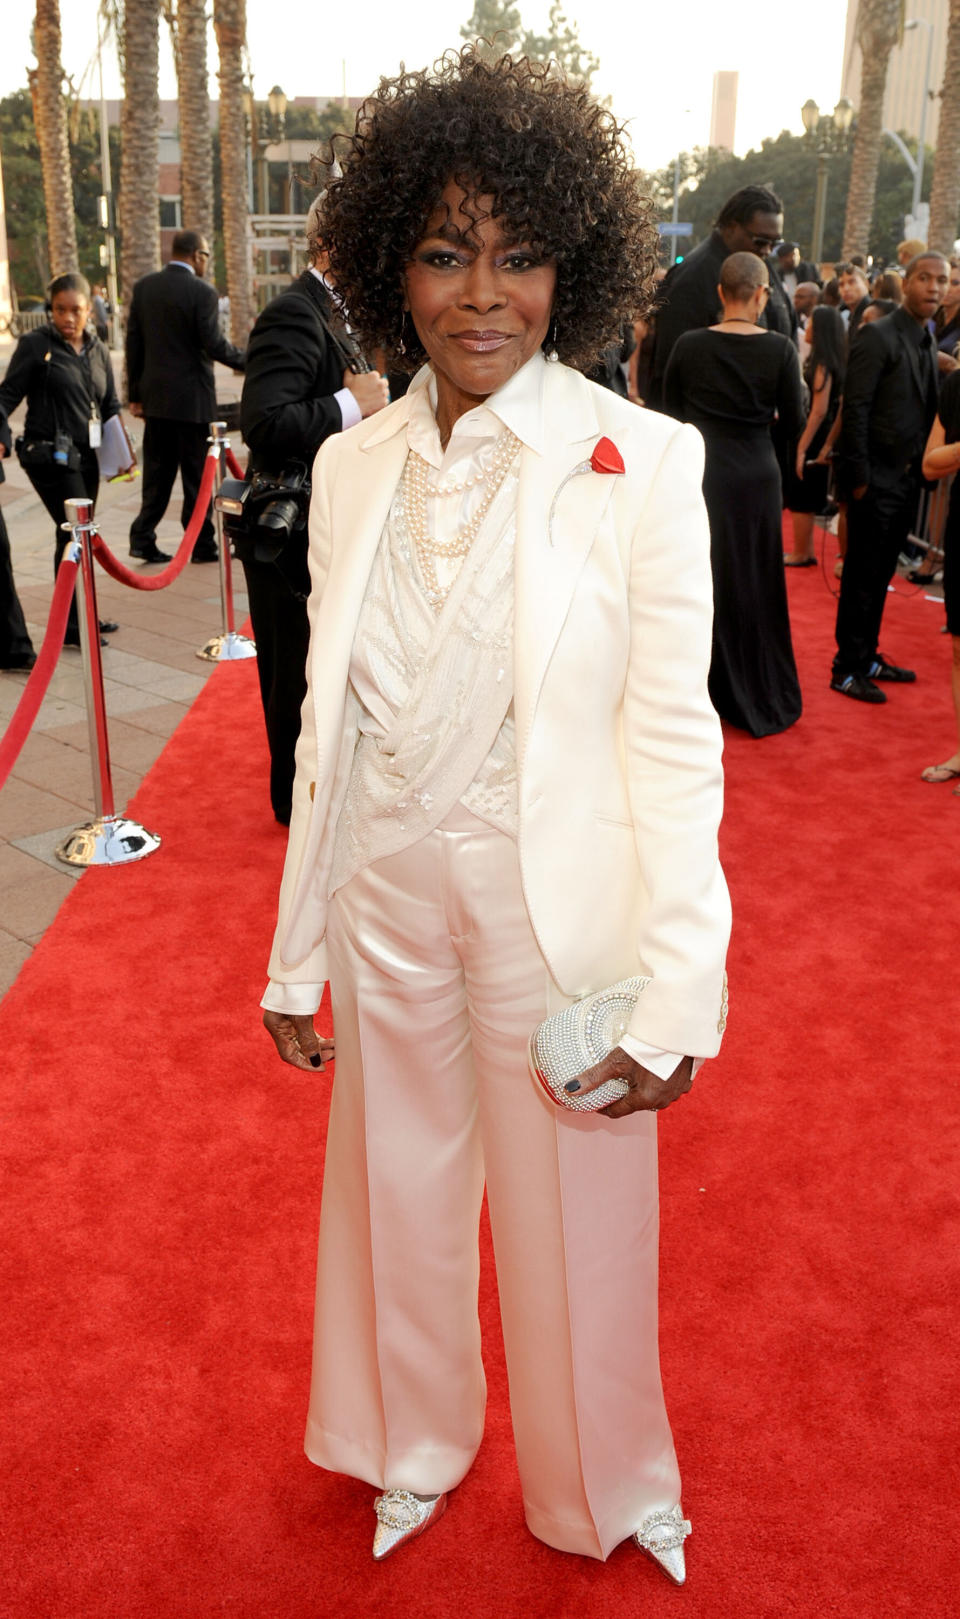  Cicely Tyson at the 42nd NAACP Image Awards in Los Angeles on March 4, 2011. 